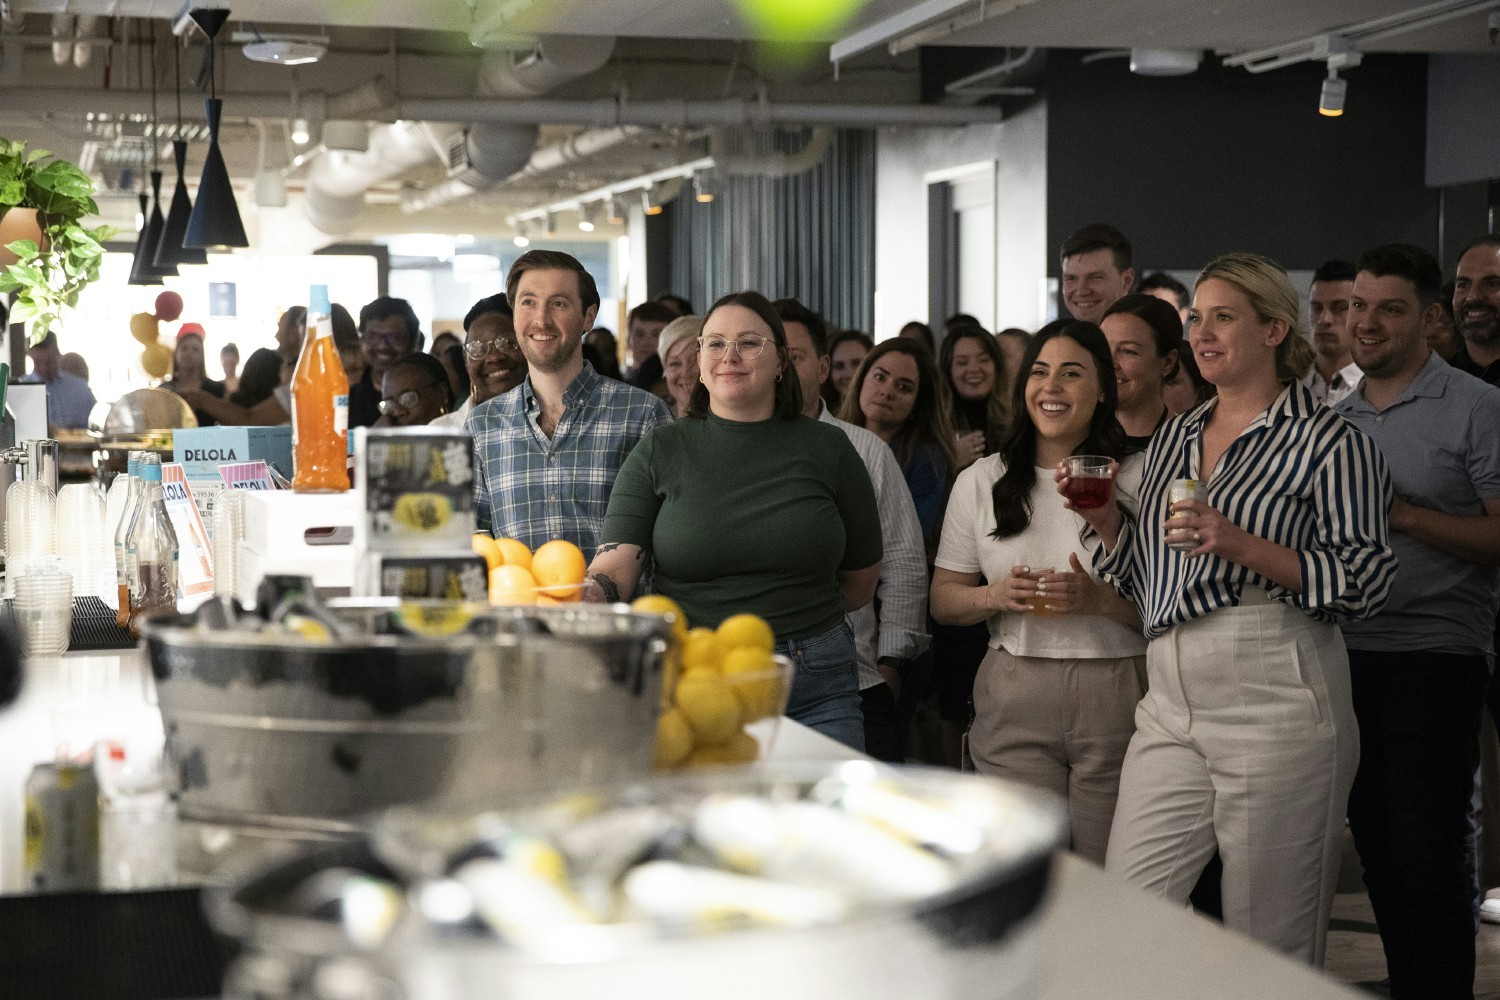 Beam Suntory employees gathered at the Chicago office to celebrate a product launch together.